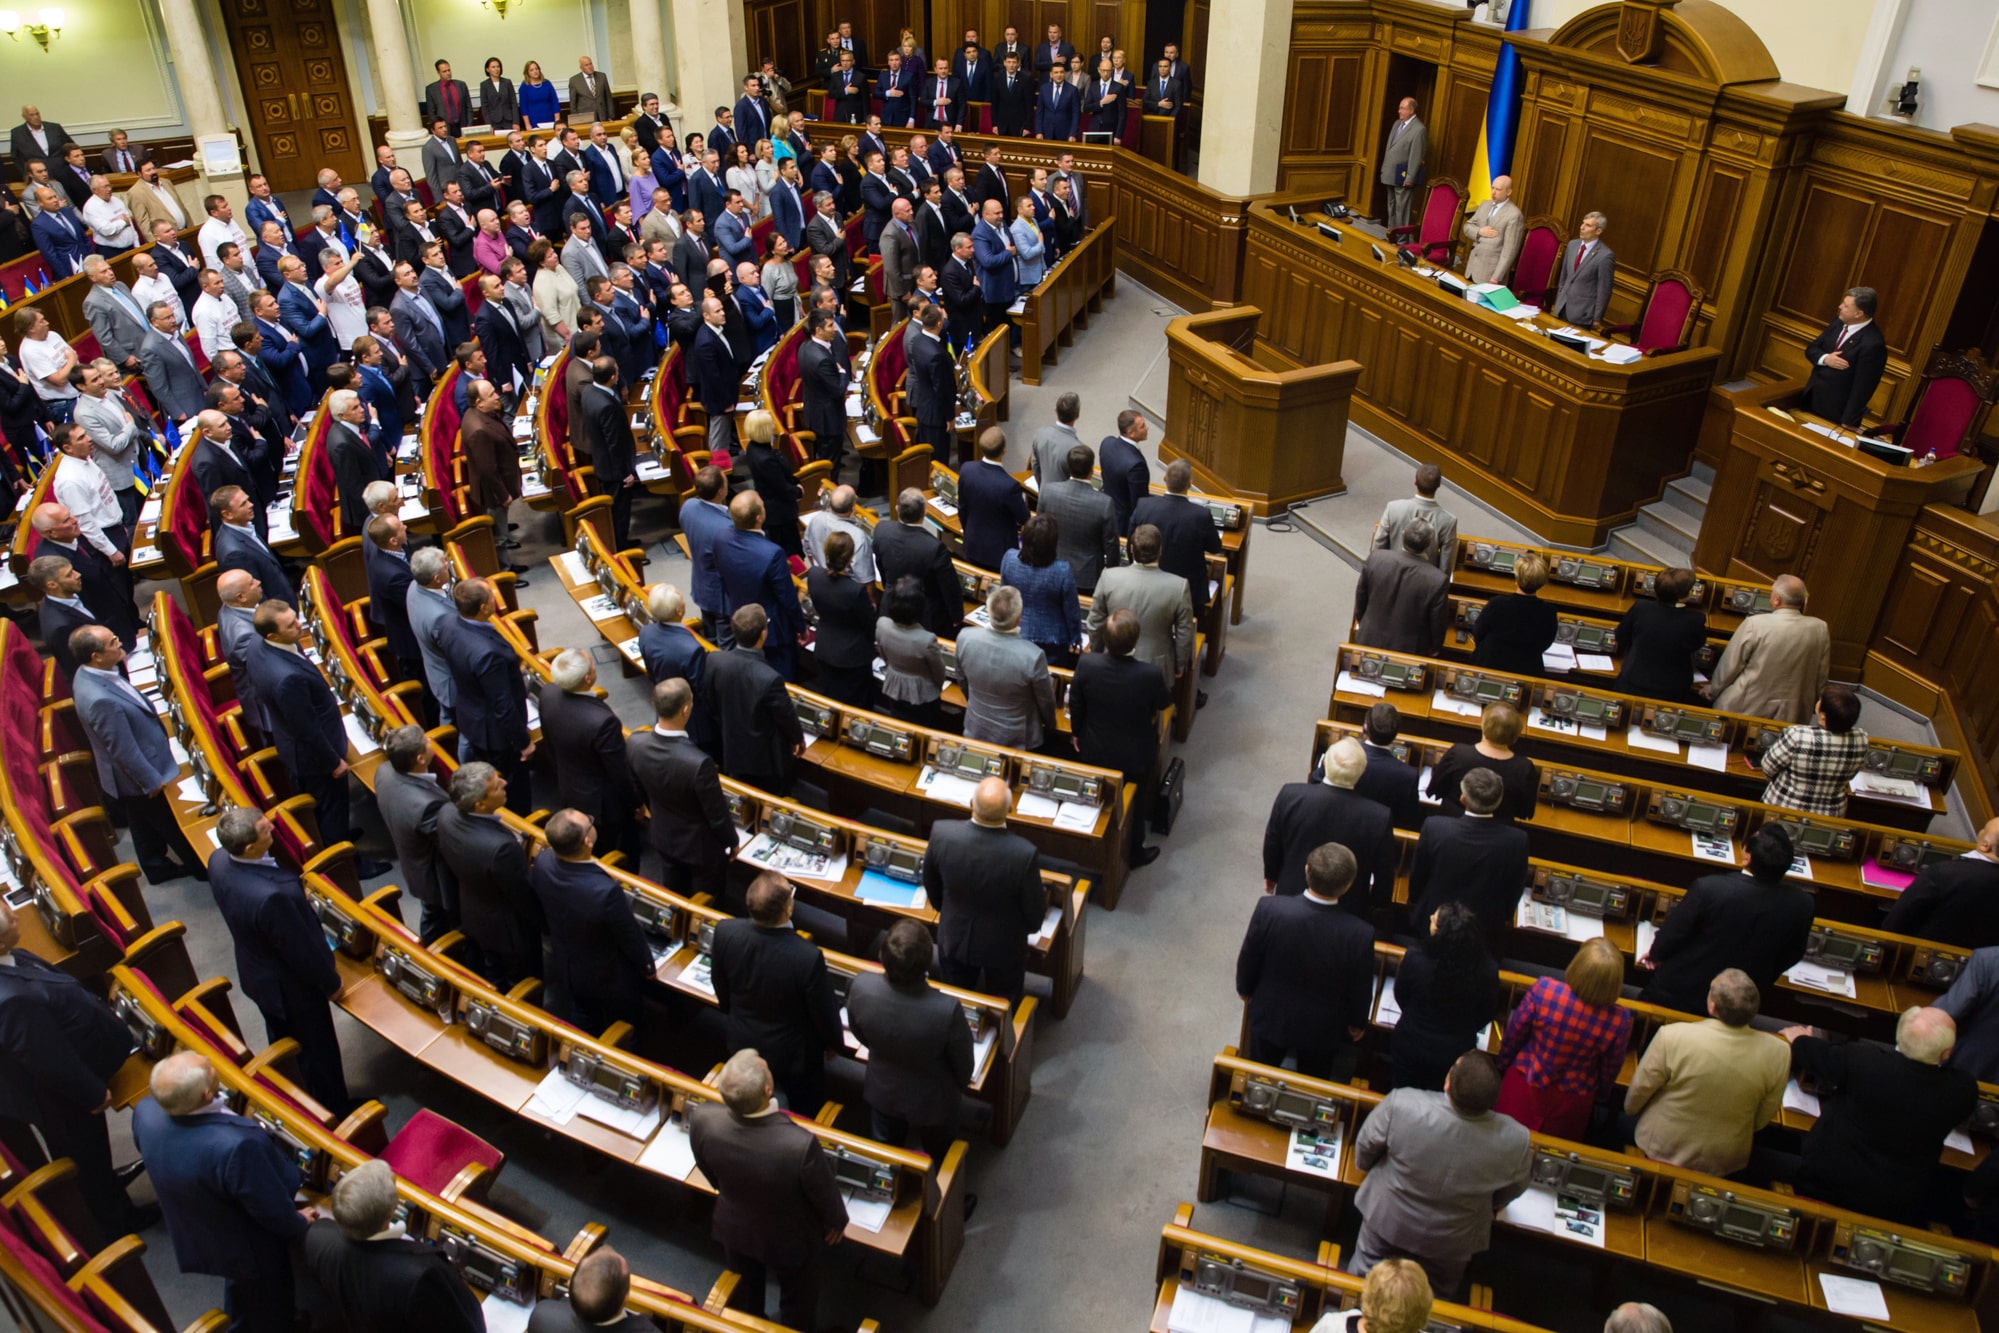 Parliament of Ukraine passes law to legalize cryptocurrency in the country